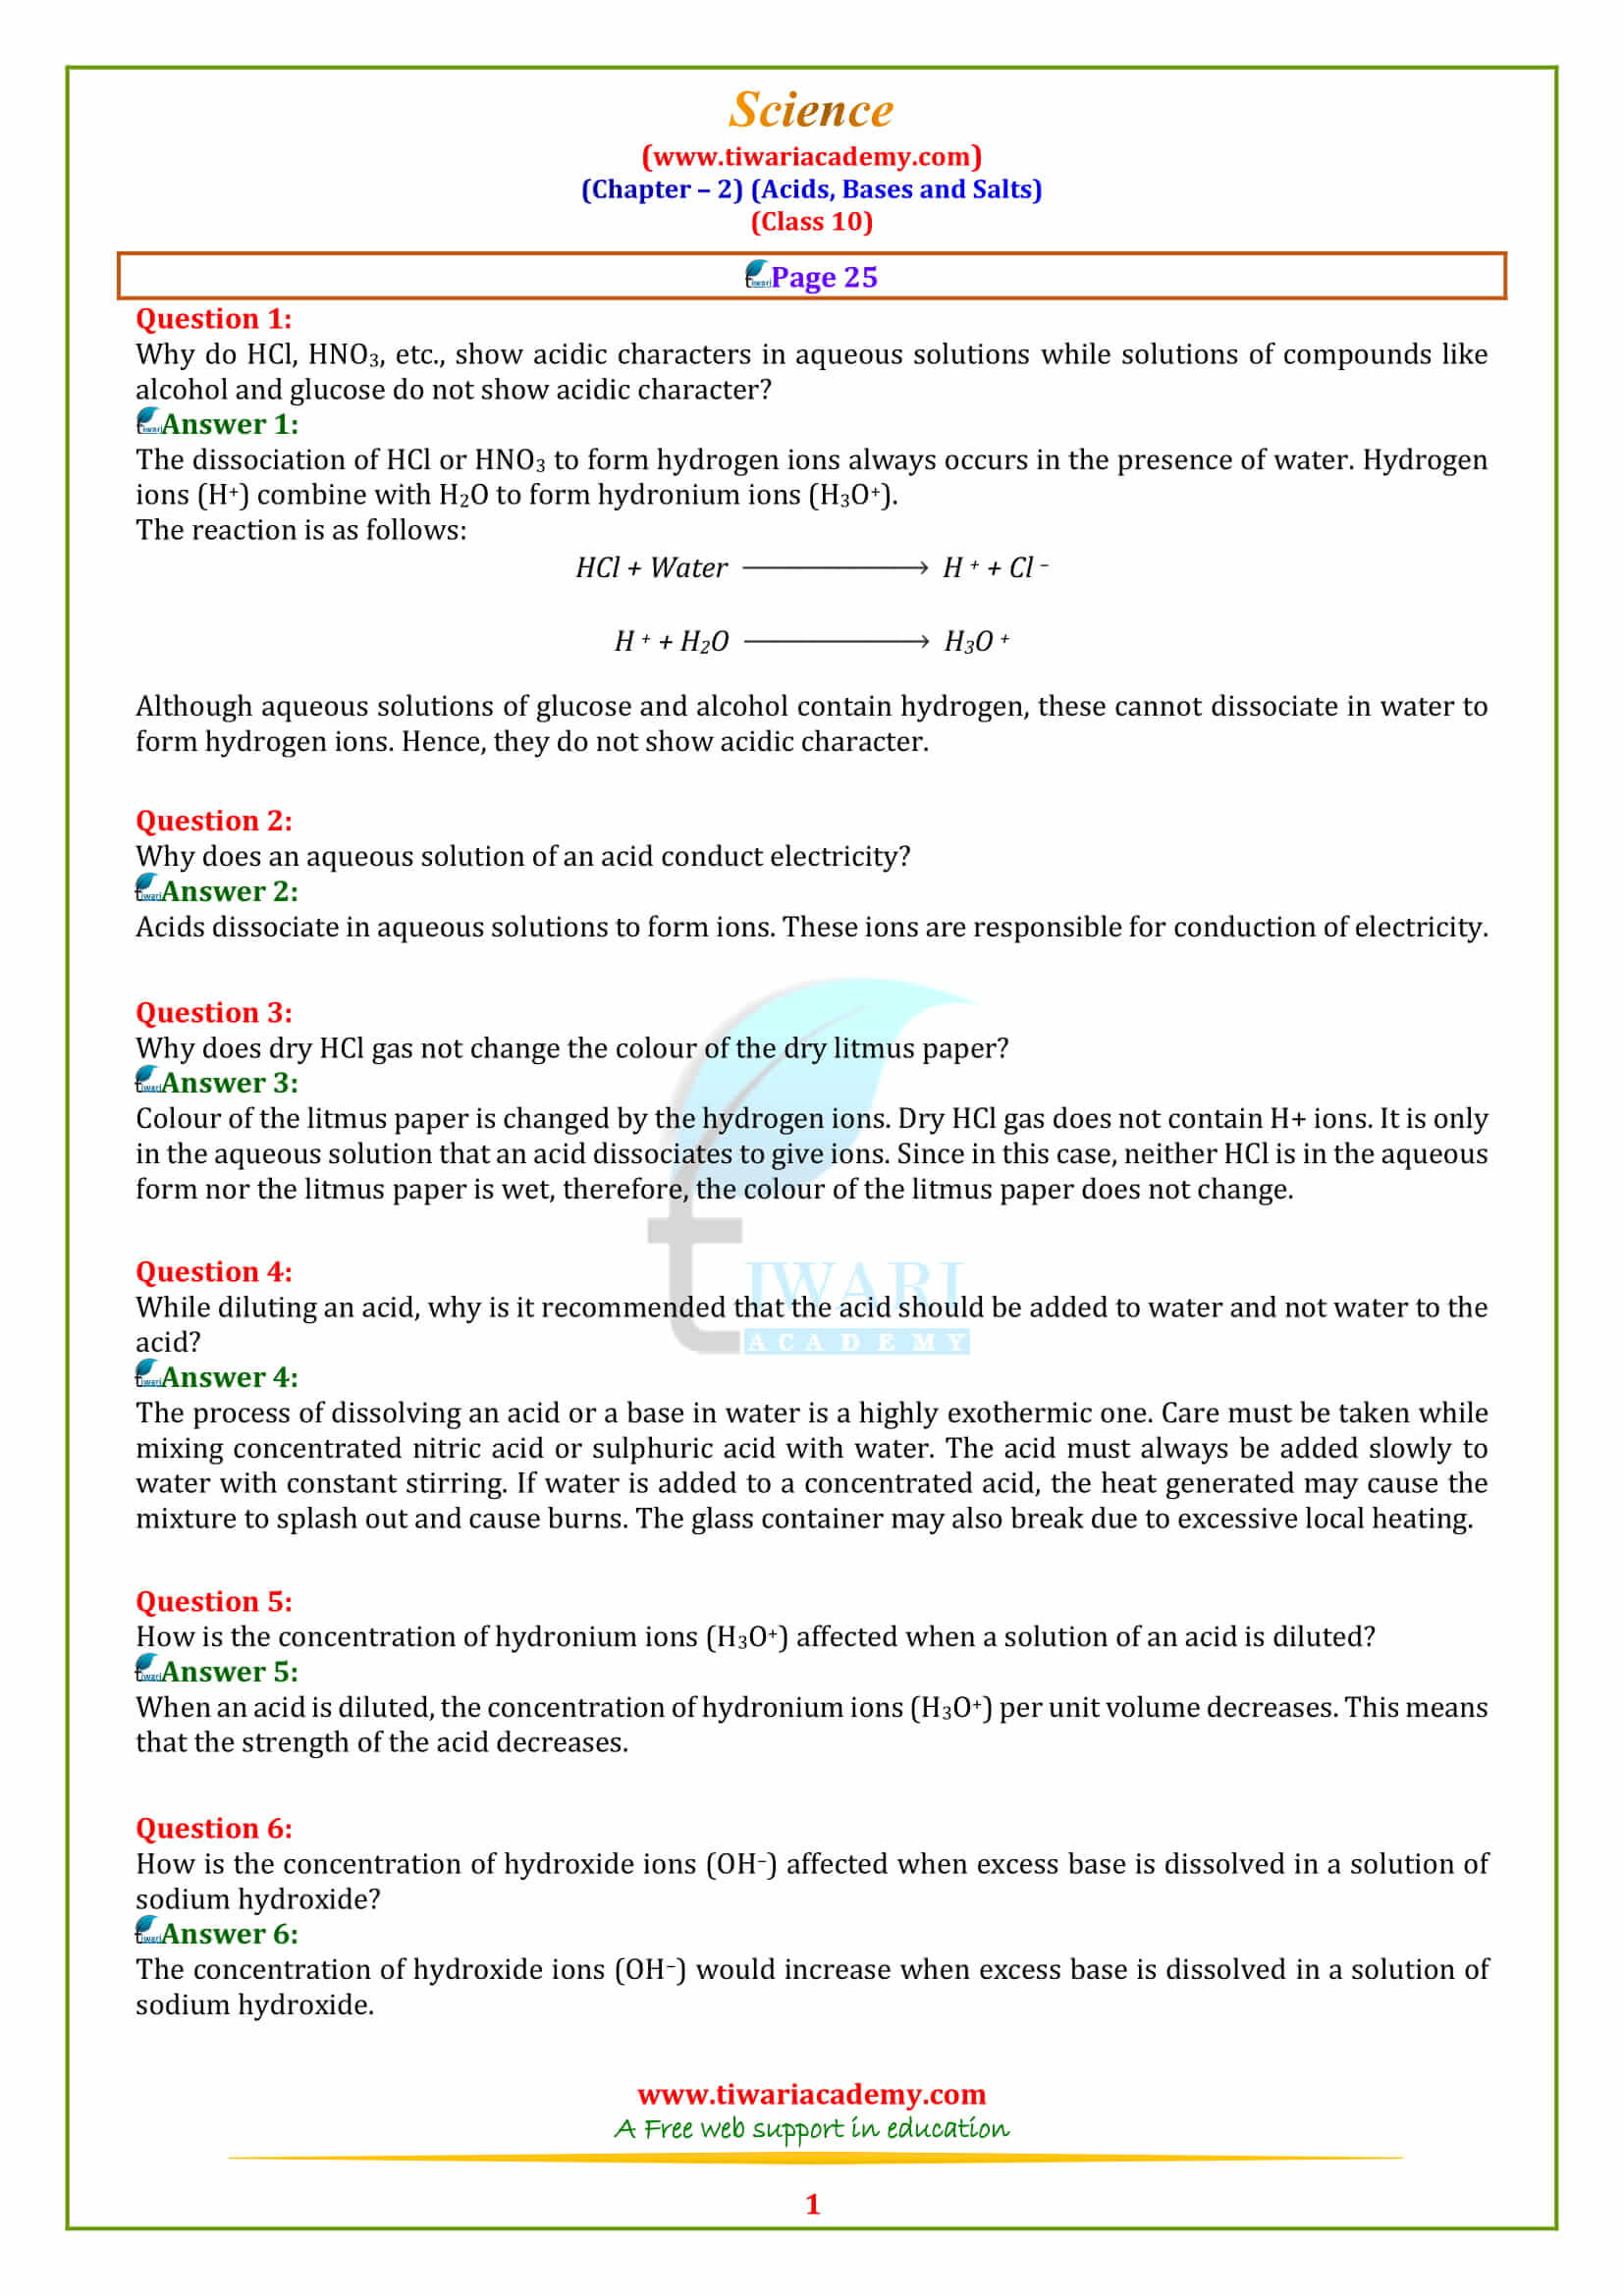 NCERT Solutions for Class 10 Science Chapter 2 Acids, Bases and Salts page 25 answers